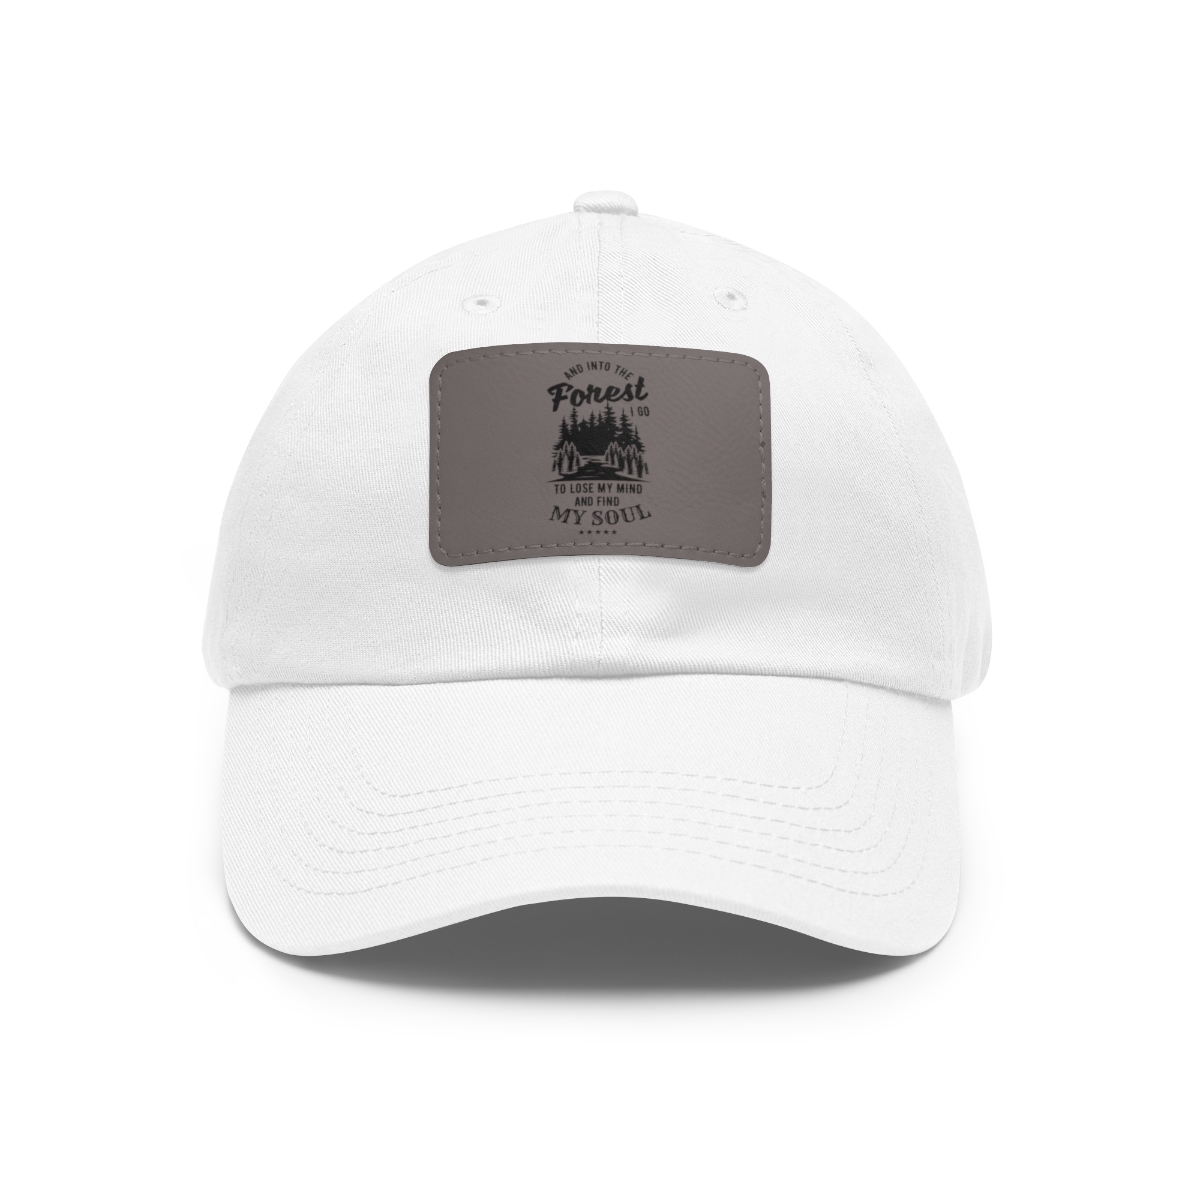 Primary image for Embroidered Dad Hat with Faux Leather Patch, Personalized Hat with Nature-Inspir